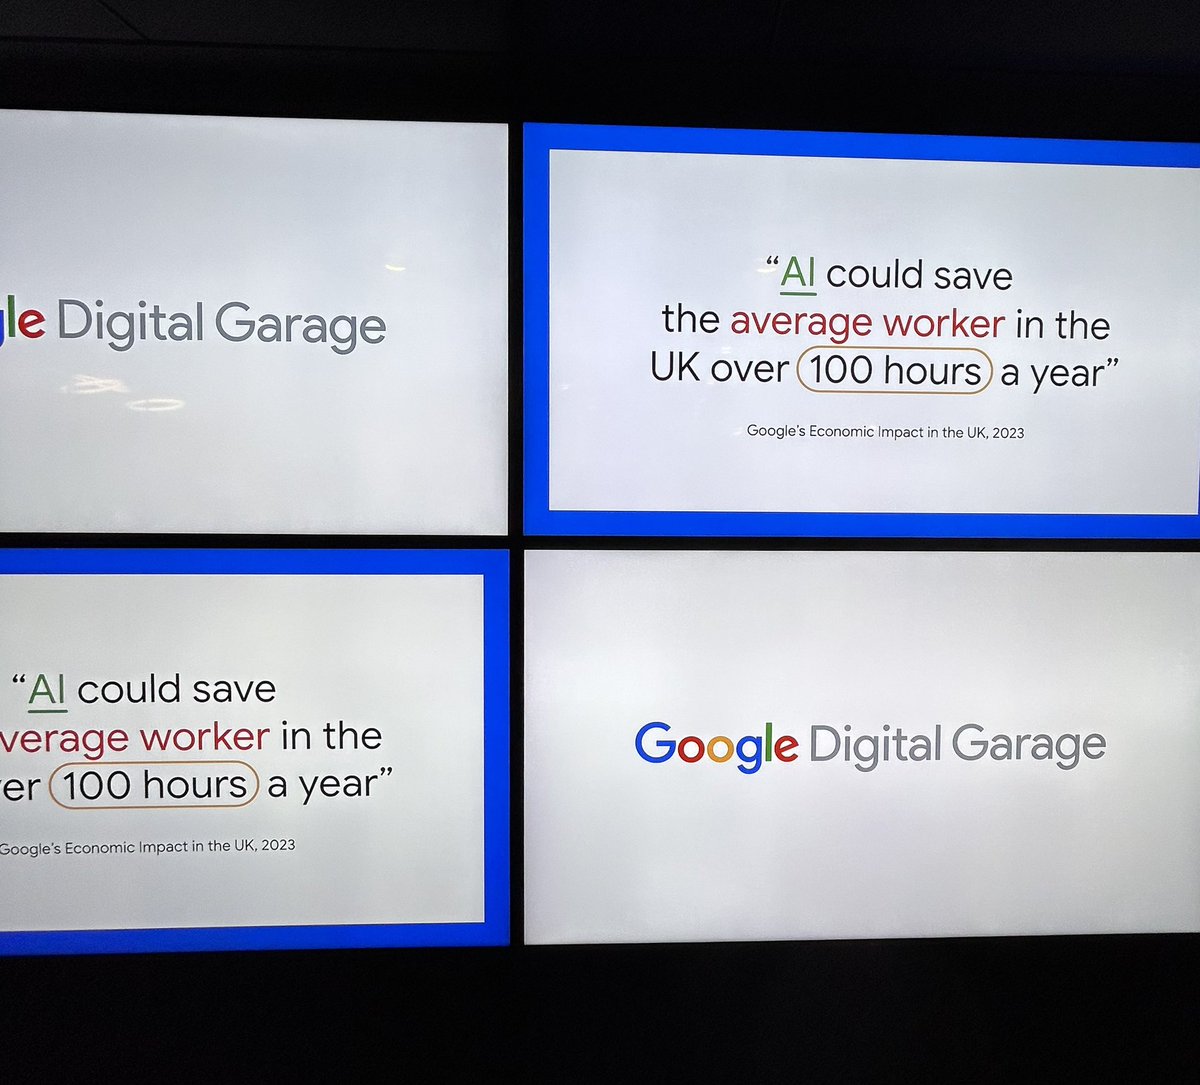 We had a great time at the Google Digital Garage AI event yesterday, discovering how businesses can implement ‘Bard’ into their work day and safe 100 hours of work a year! 

Well done @GoogleUK for a fantastic day!👏🚀 

#AIforbusiness #Googledigitalgarage